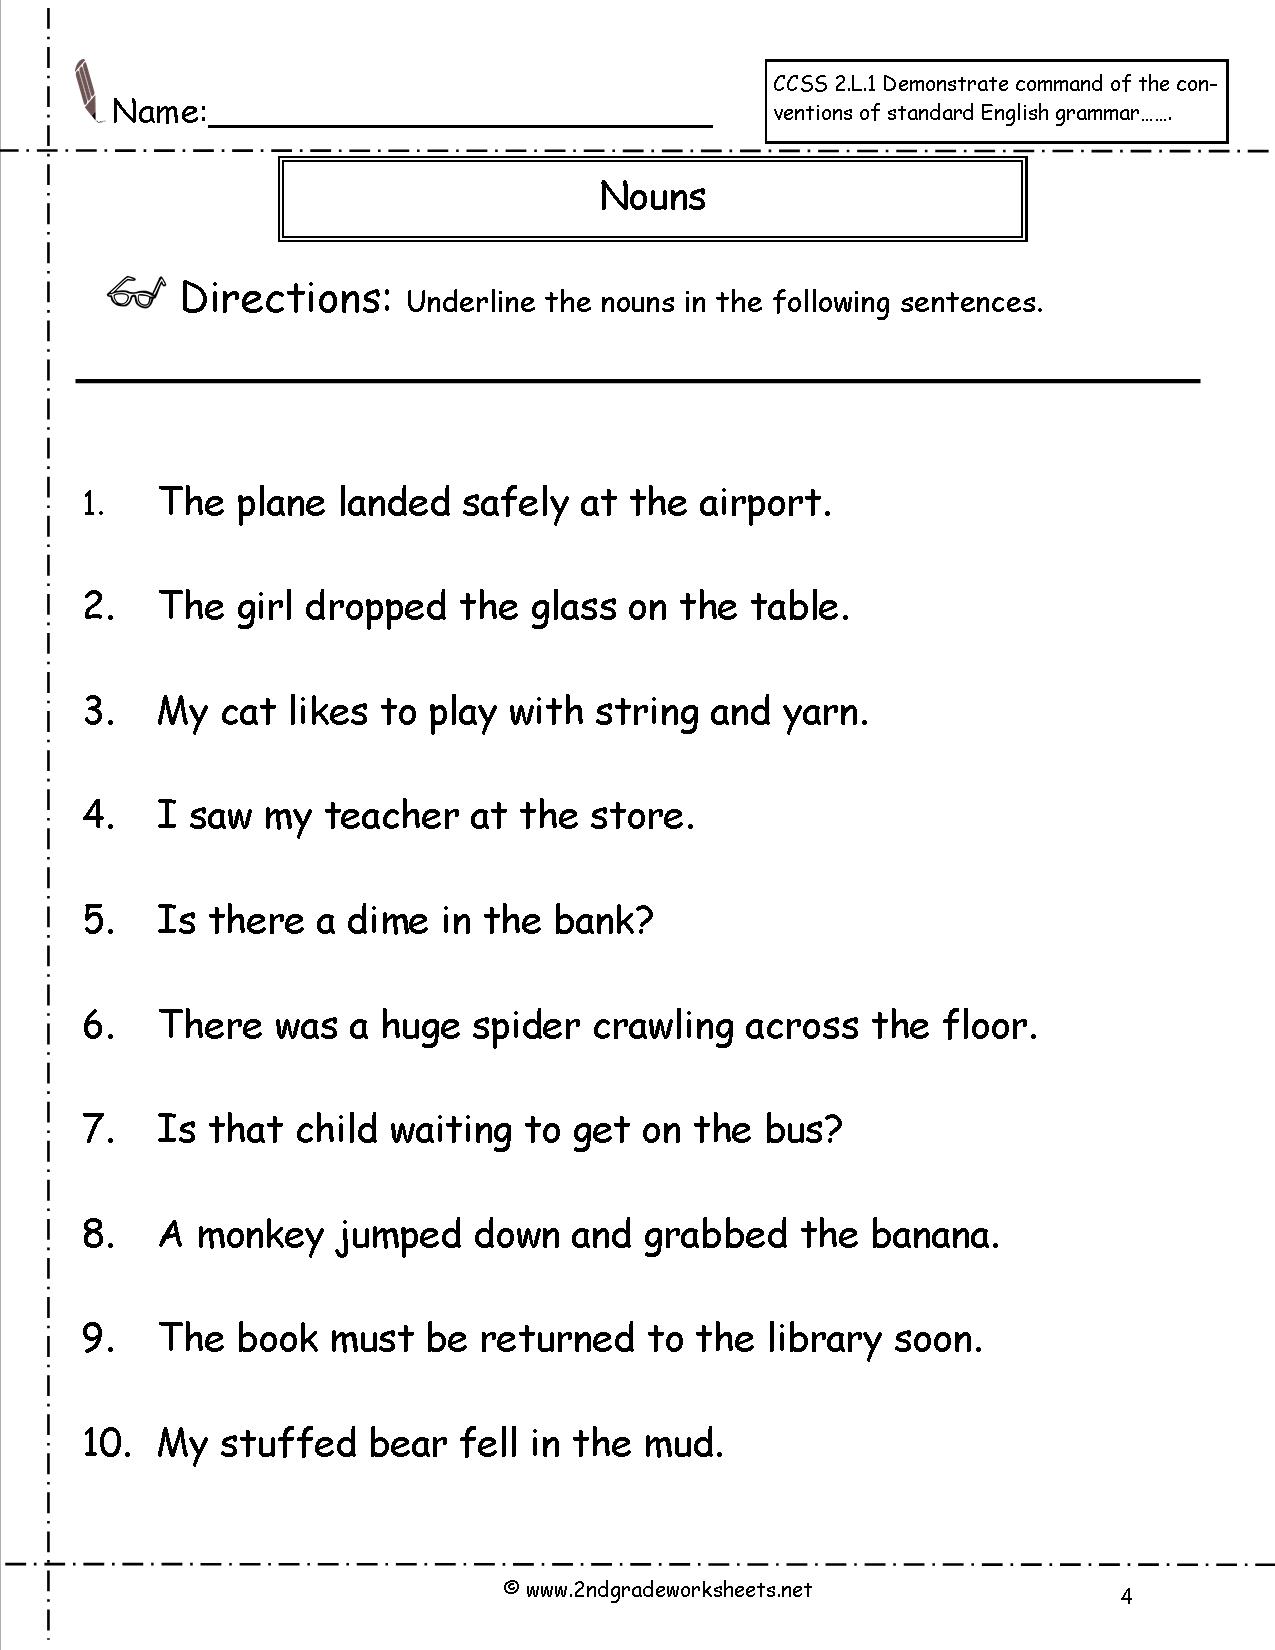 classifying-nouns-verbs-or-adjectives-worksheet-have-fun-teaching